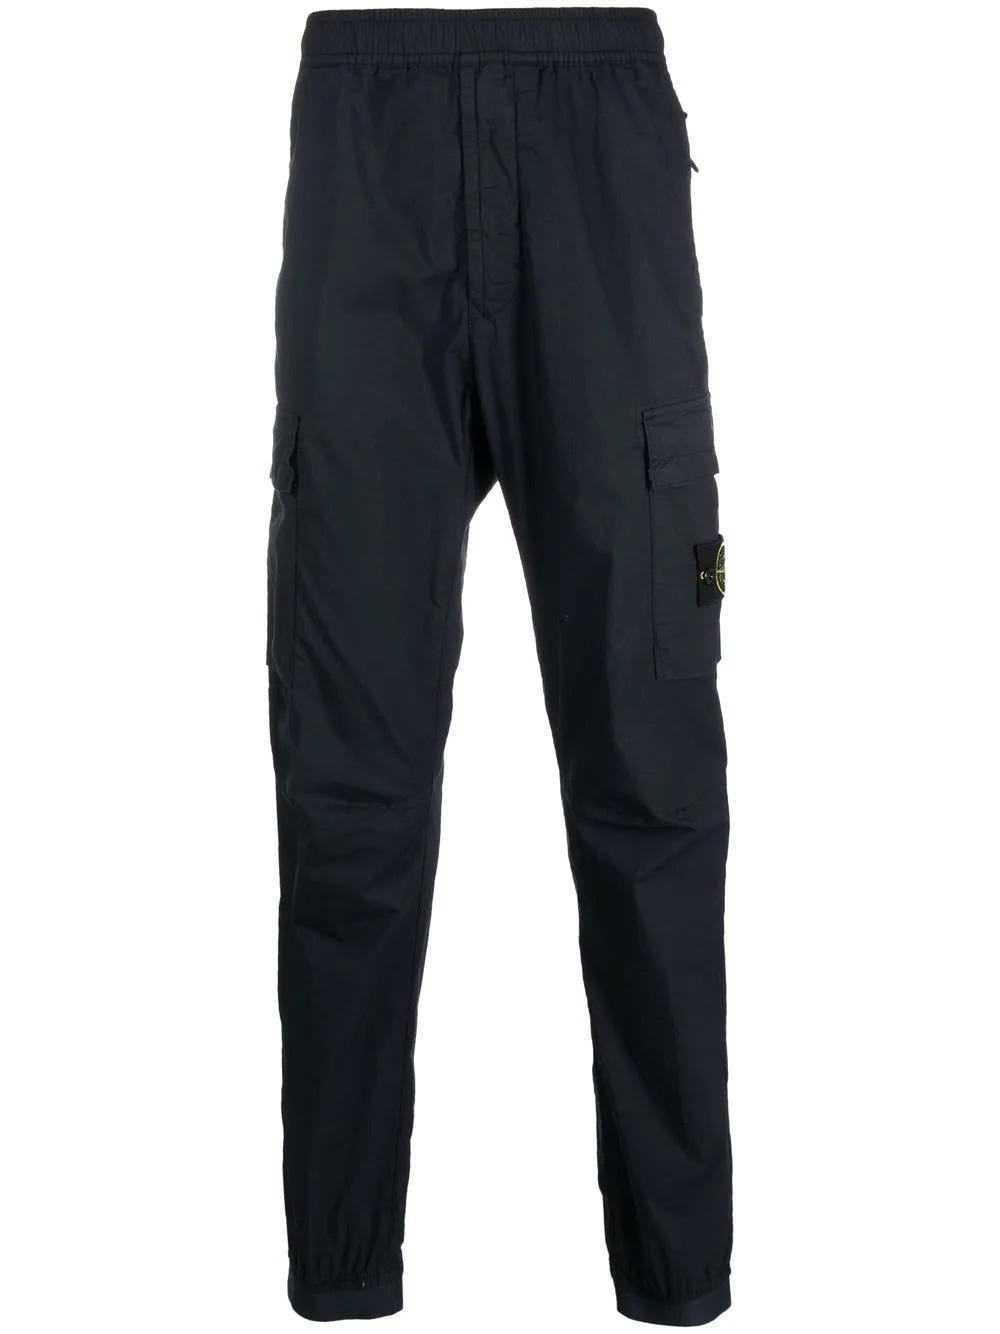 STONE ISLAND PANTS WITH SIDE CARGO POCKET DETAIL BLUE